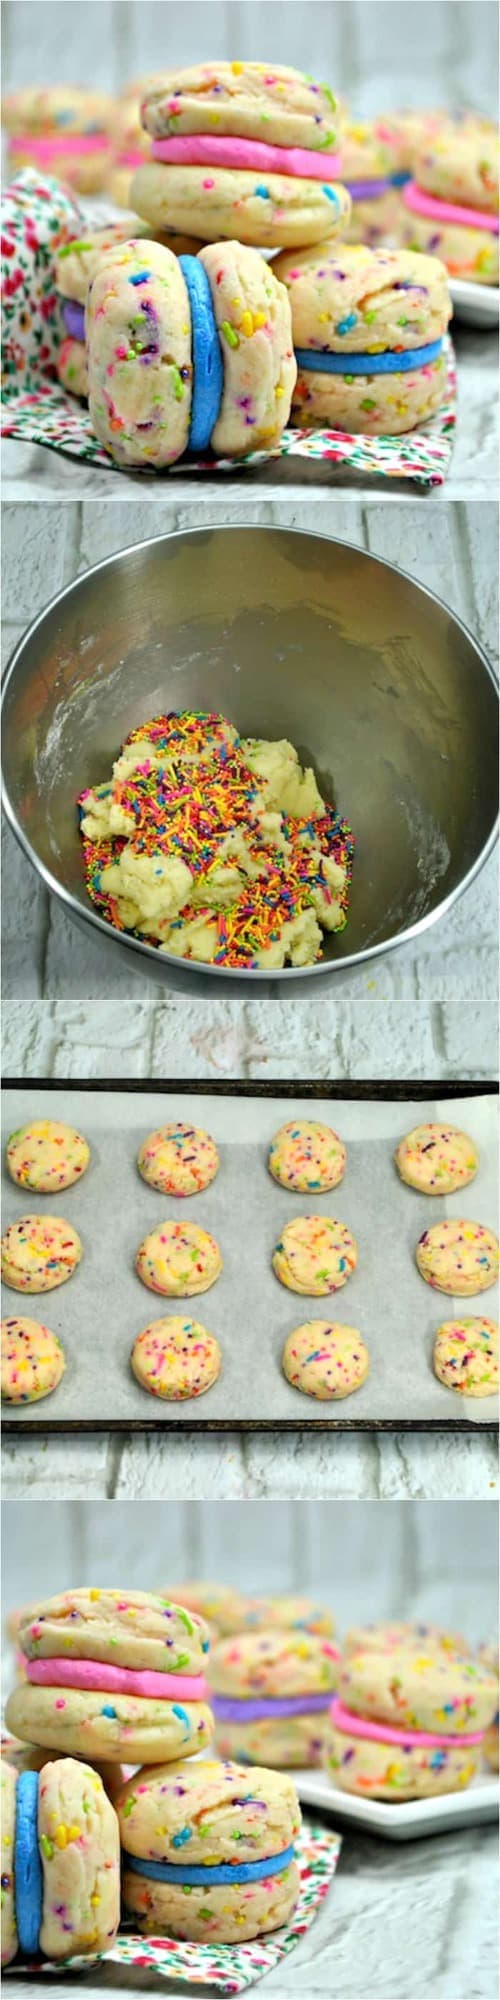 How to make Funfetti Whoopie Pies